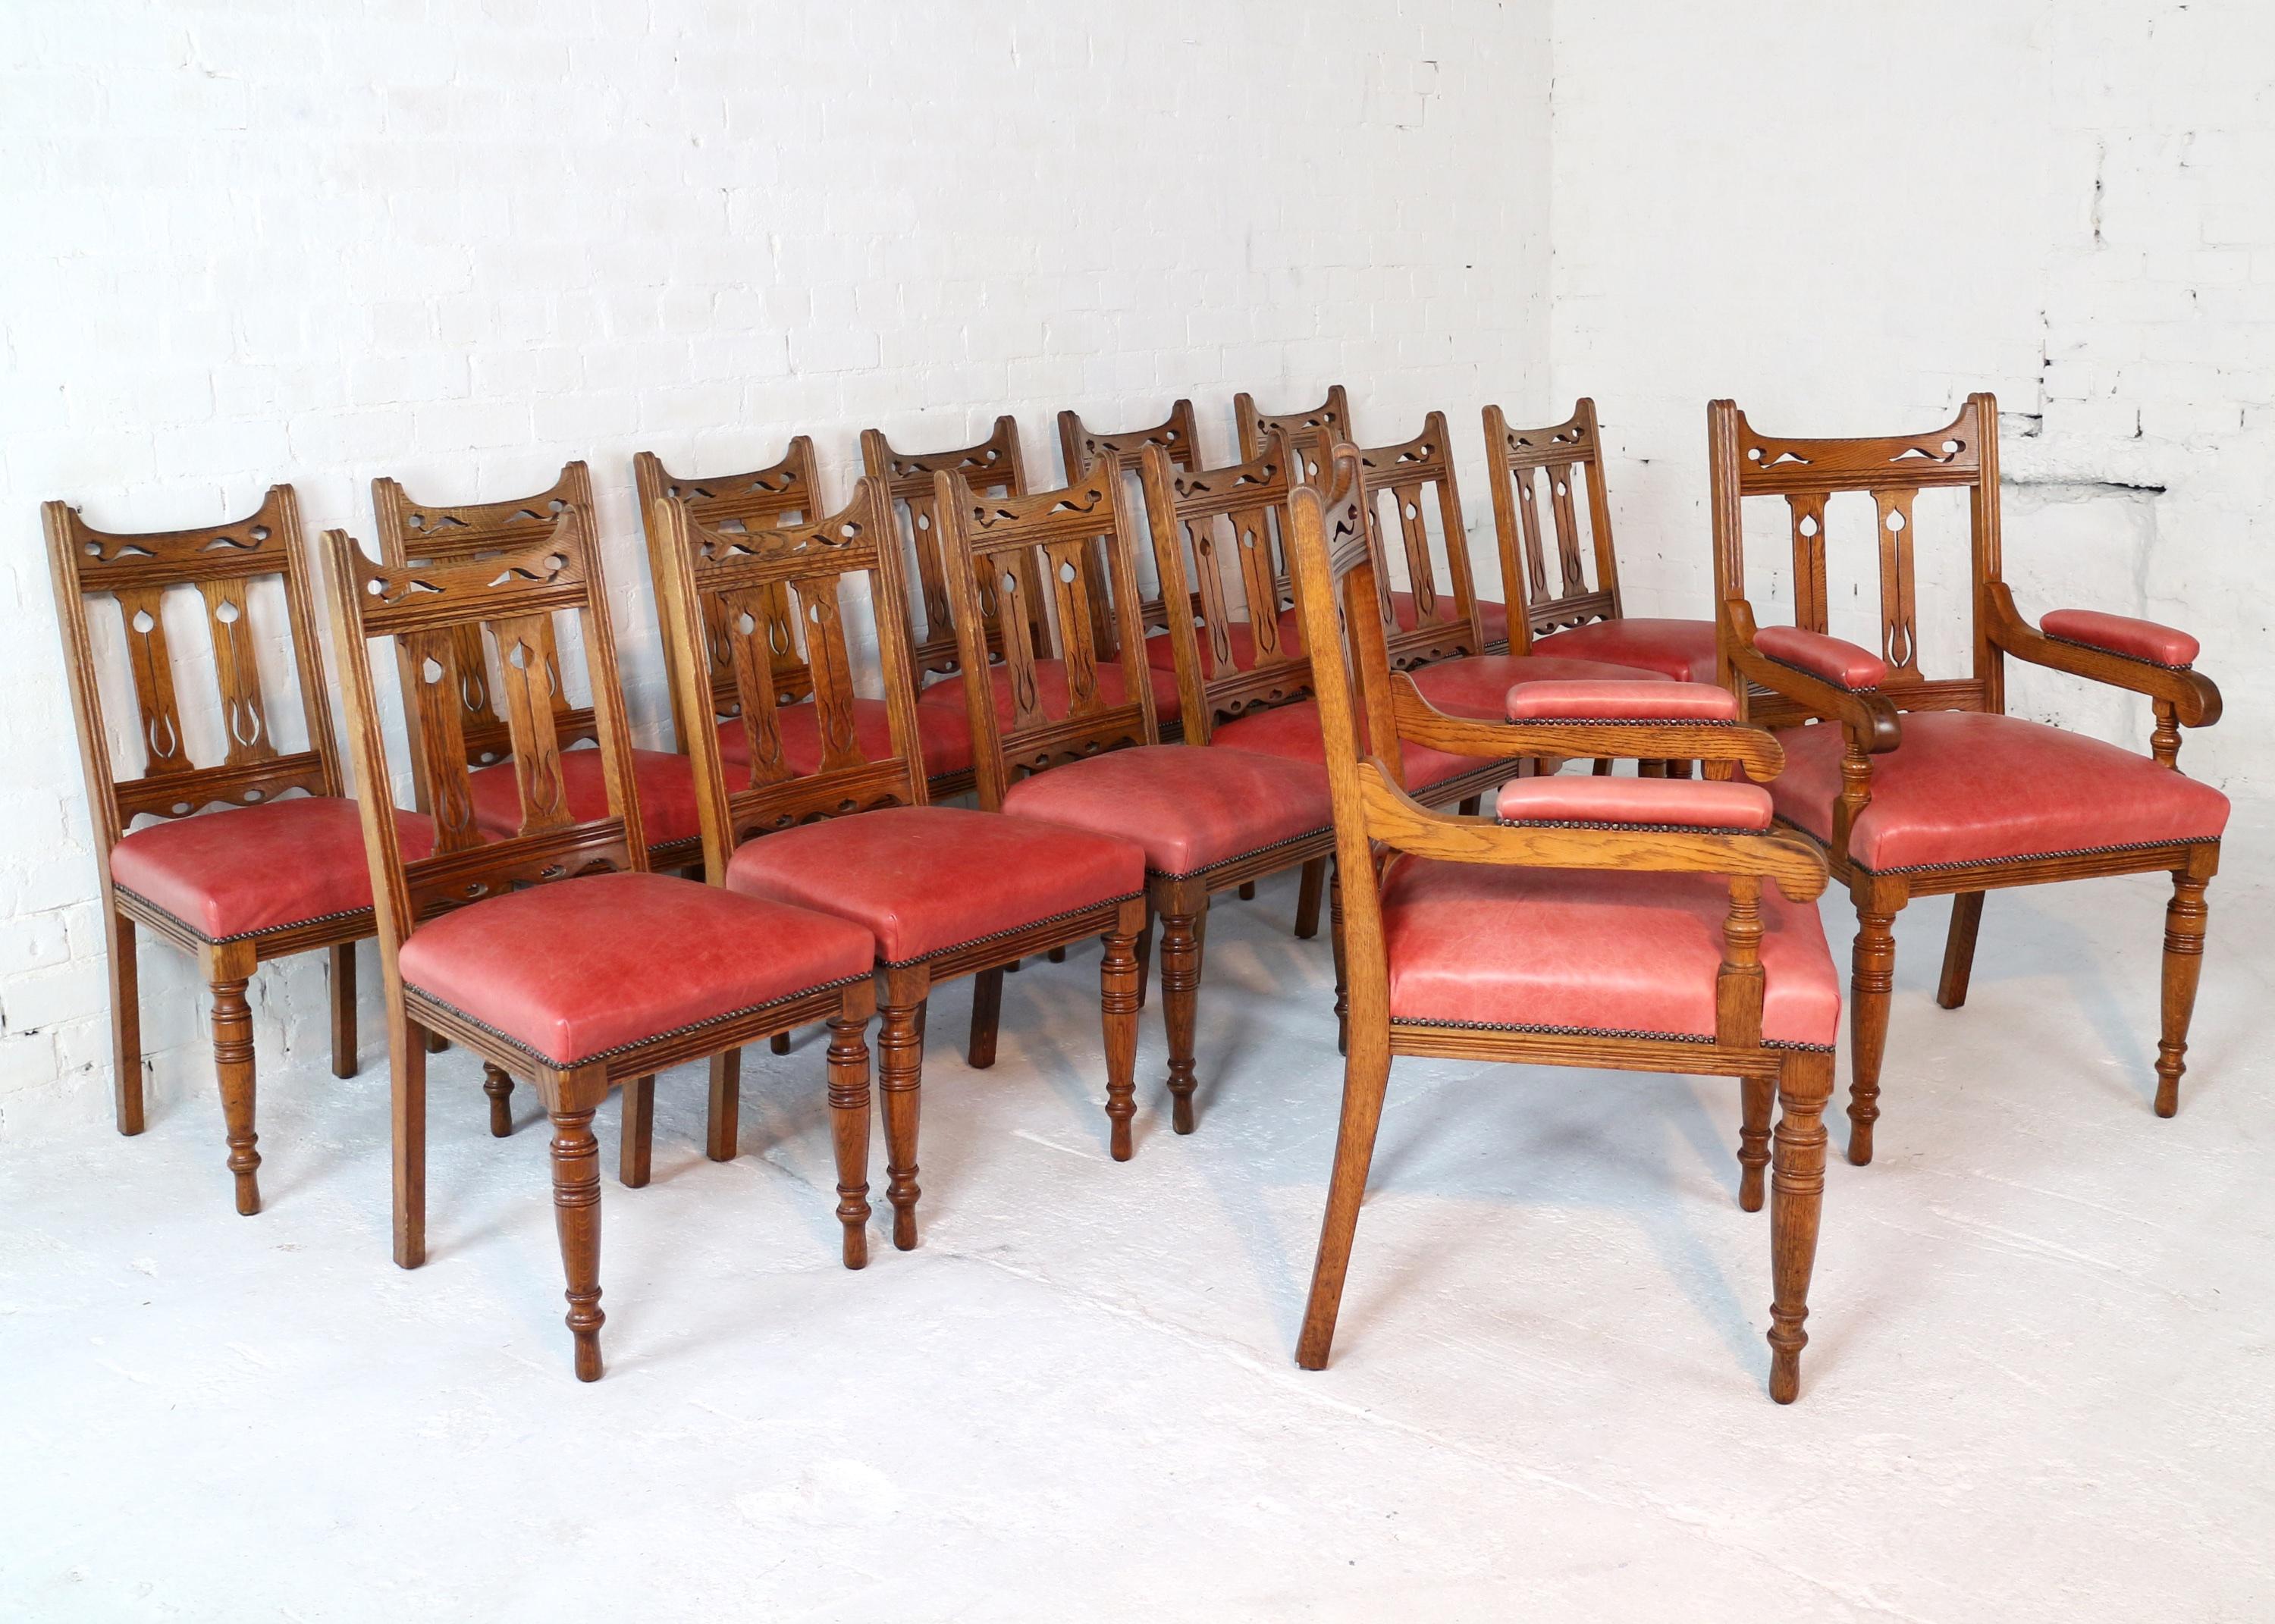 A super original set of 14 19th century Arts & Crafts golden oak dining chairs probably by Liberty’s or Wylie & Lochhead. Comprising 12 side chairs and two carver armchairs they feature a pierced top rail and stylized tulip pierced splats above